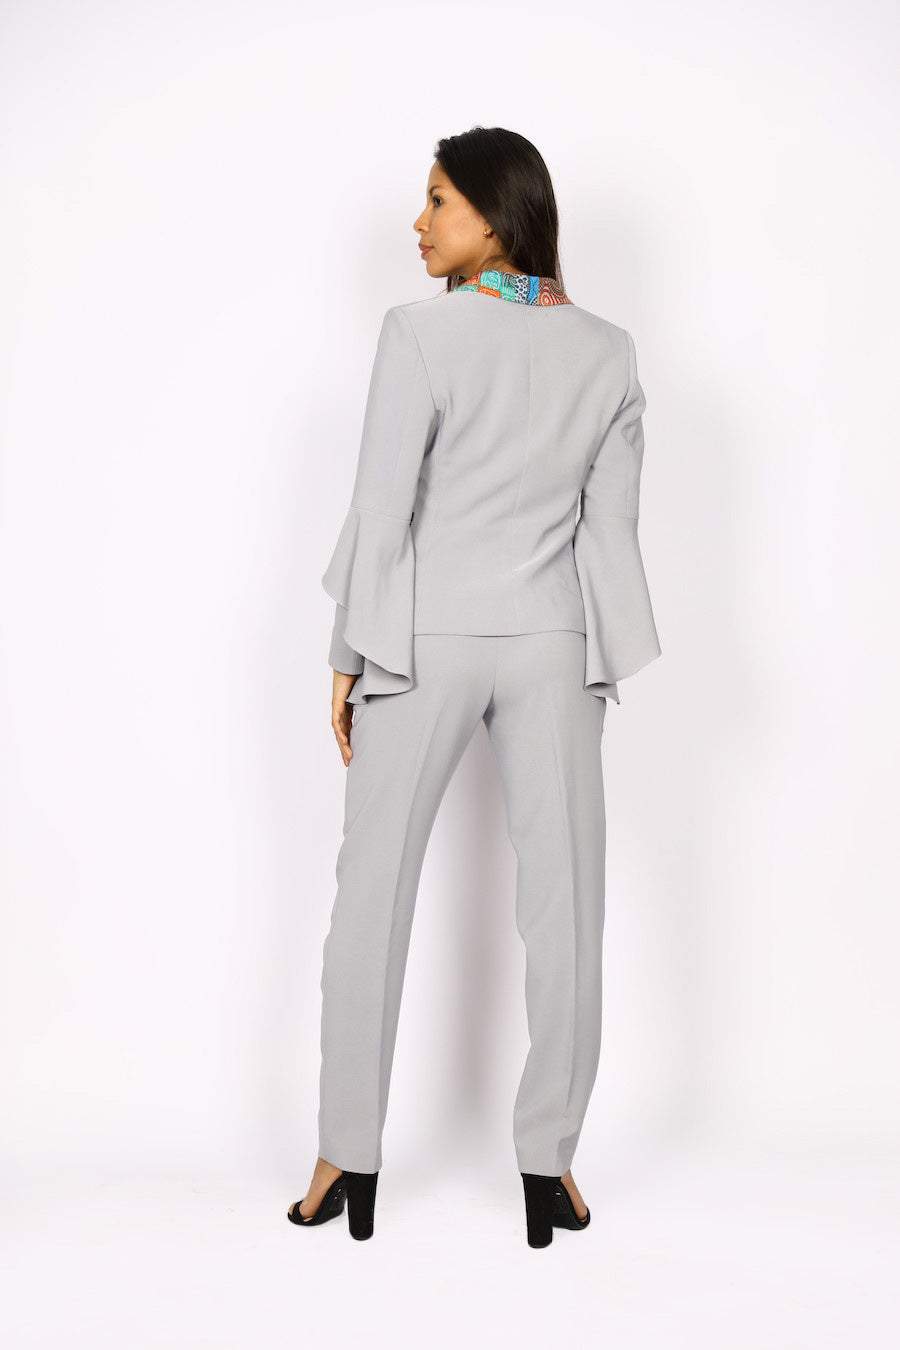 African Office Wear Suit Grey-danddclothing-AFRICAN WEAR FOR WOMEN,Grey,Ladies Suits